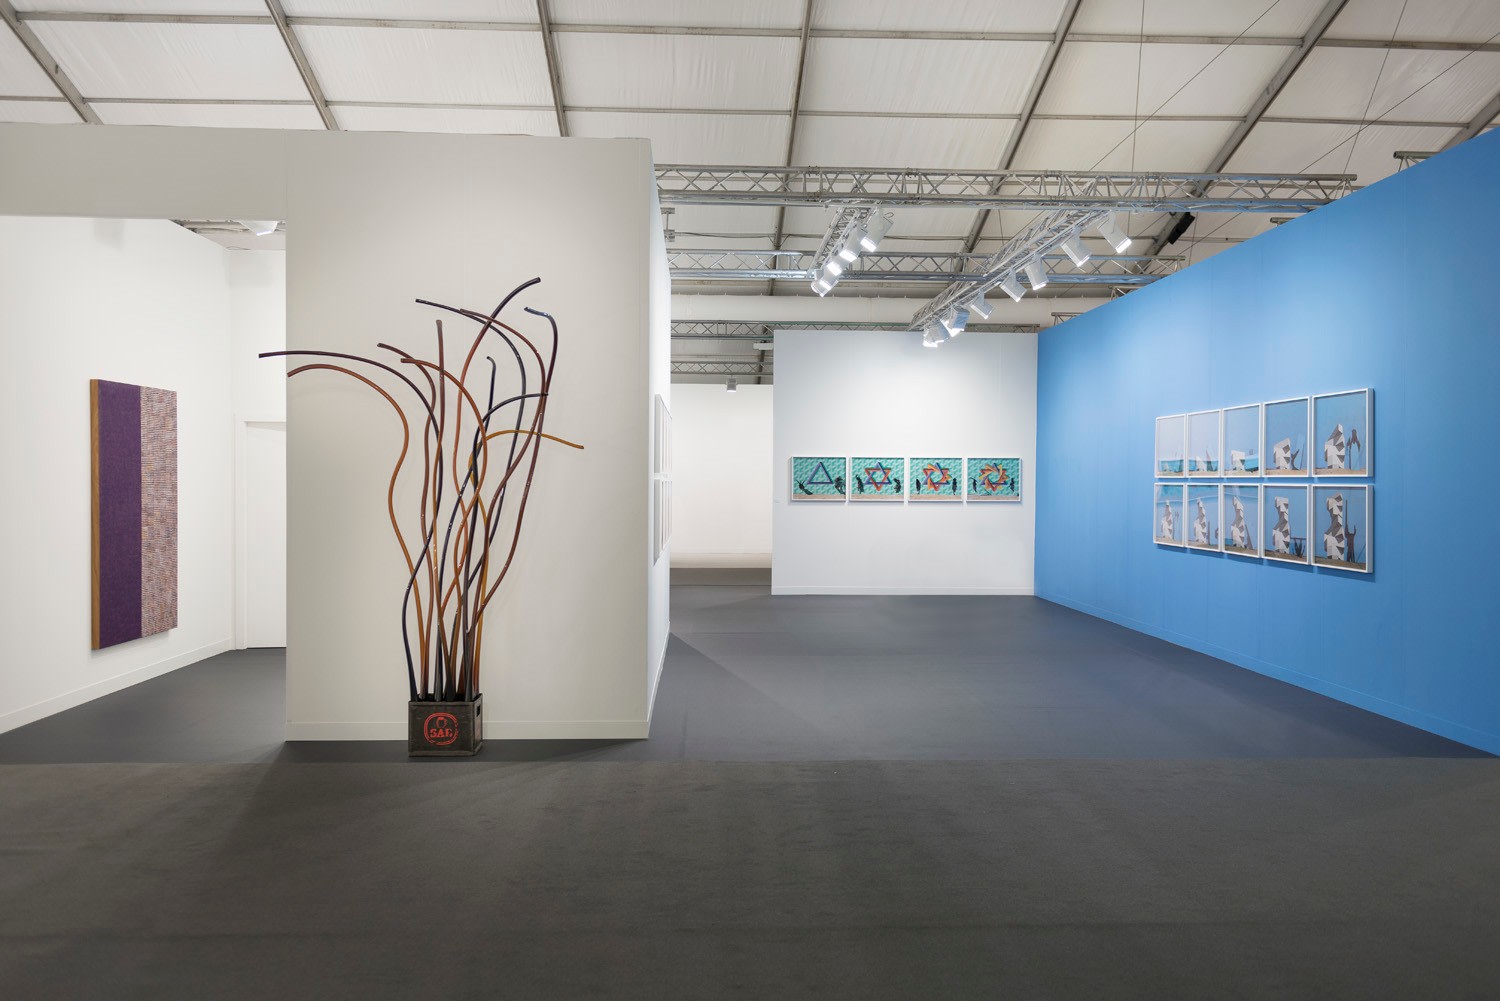 Installation view of Lehmann Maupin's booth at Frieze art fair in London 2019, view 1